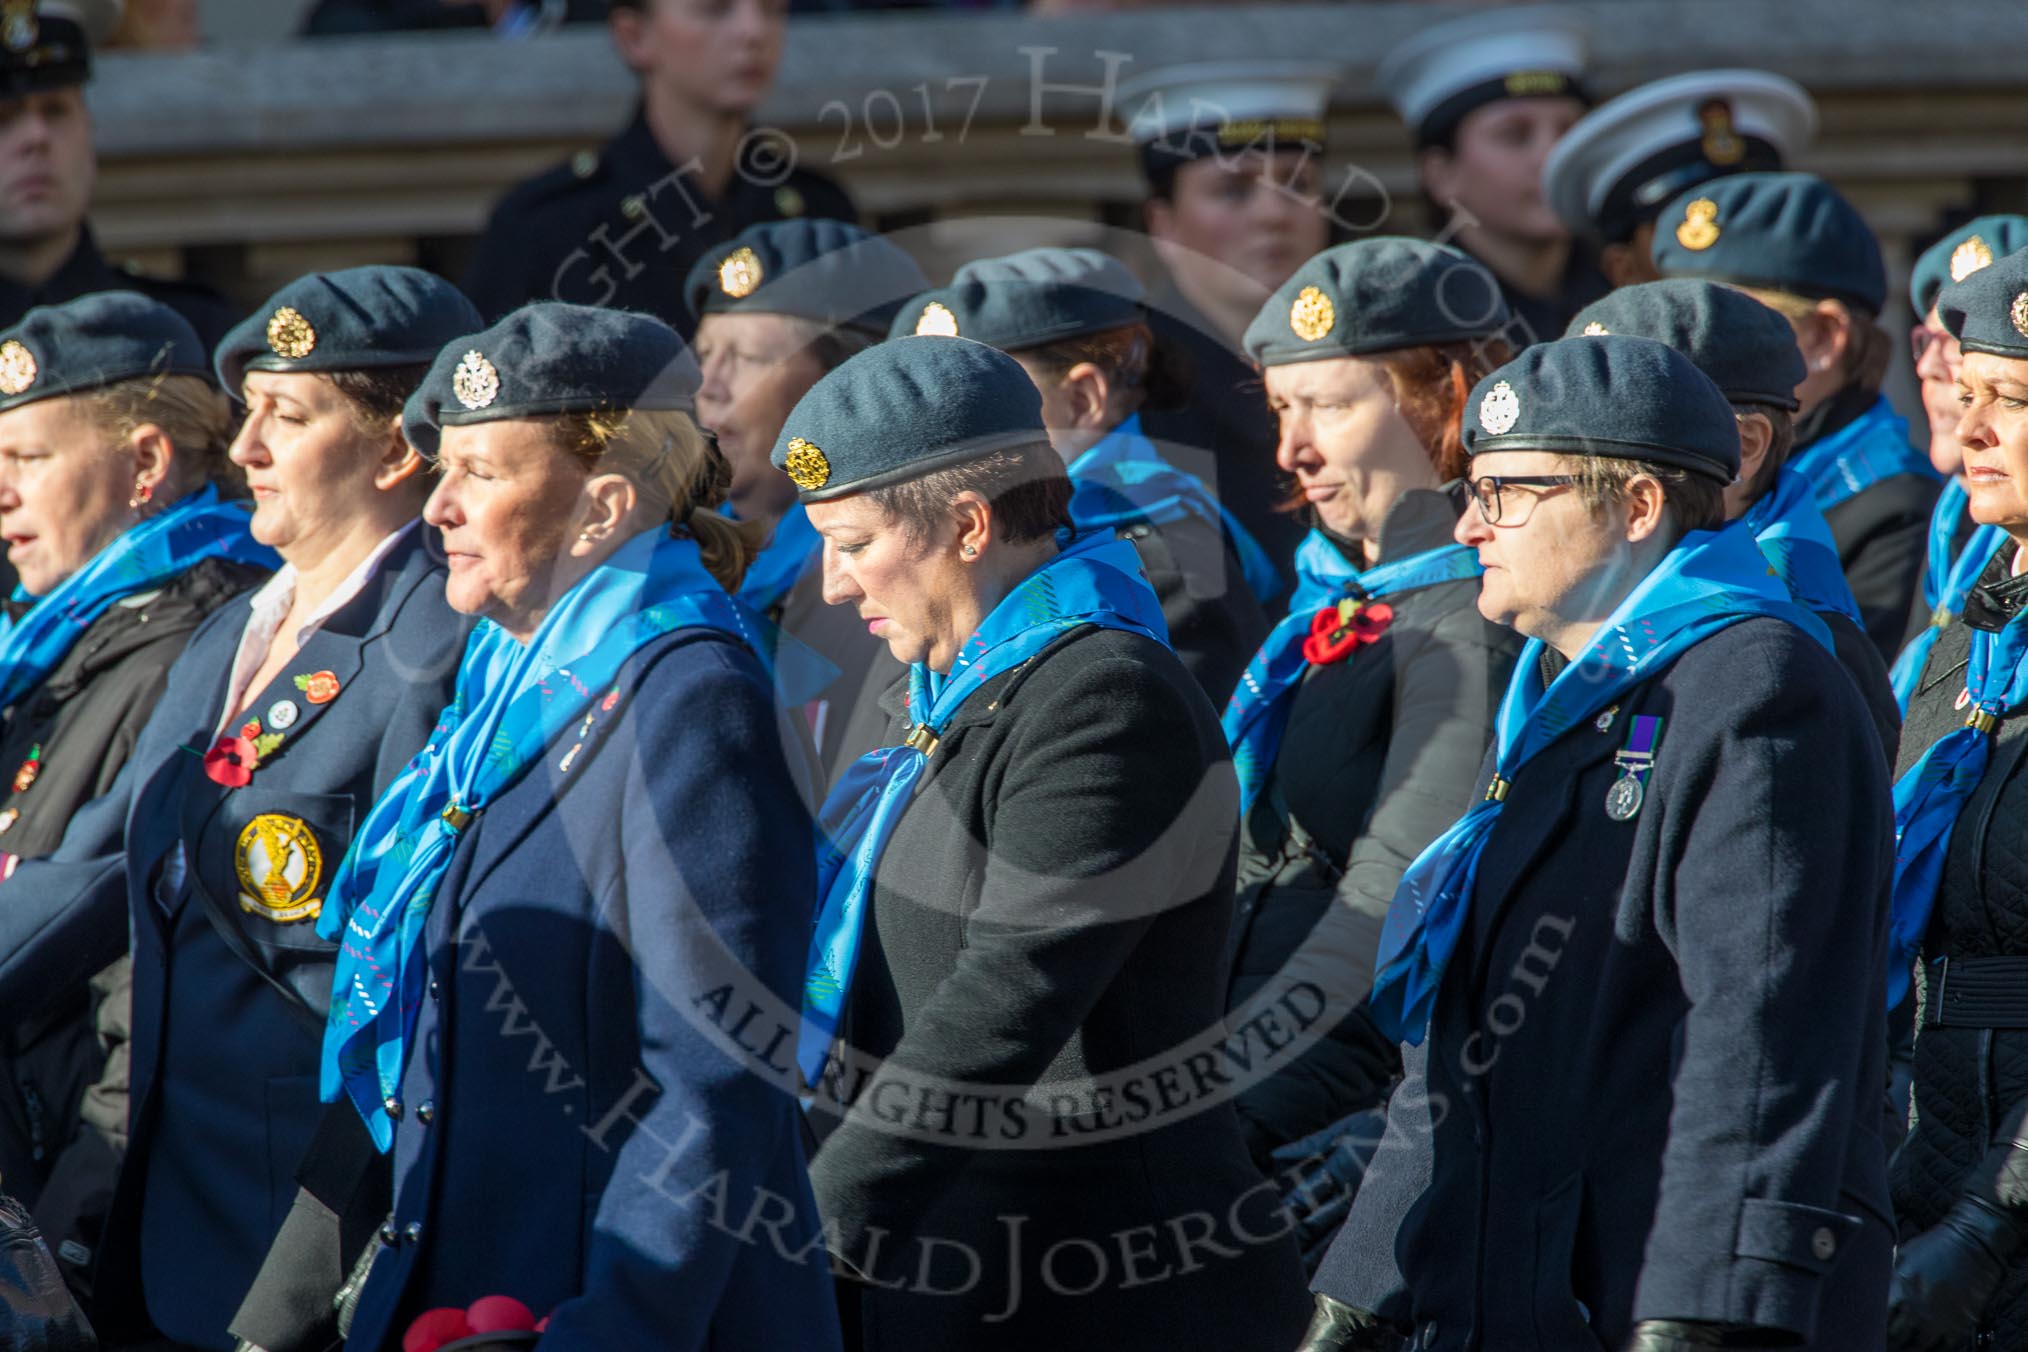 WRAF Branch of the Royal Air Forces Association (Group C30, 80 members) during the Royal British Legion March Past on Remembrance Sunday at the Cenotaph, Whitehall, Westminster, London, 11 November 2018, 12:19.